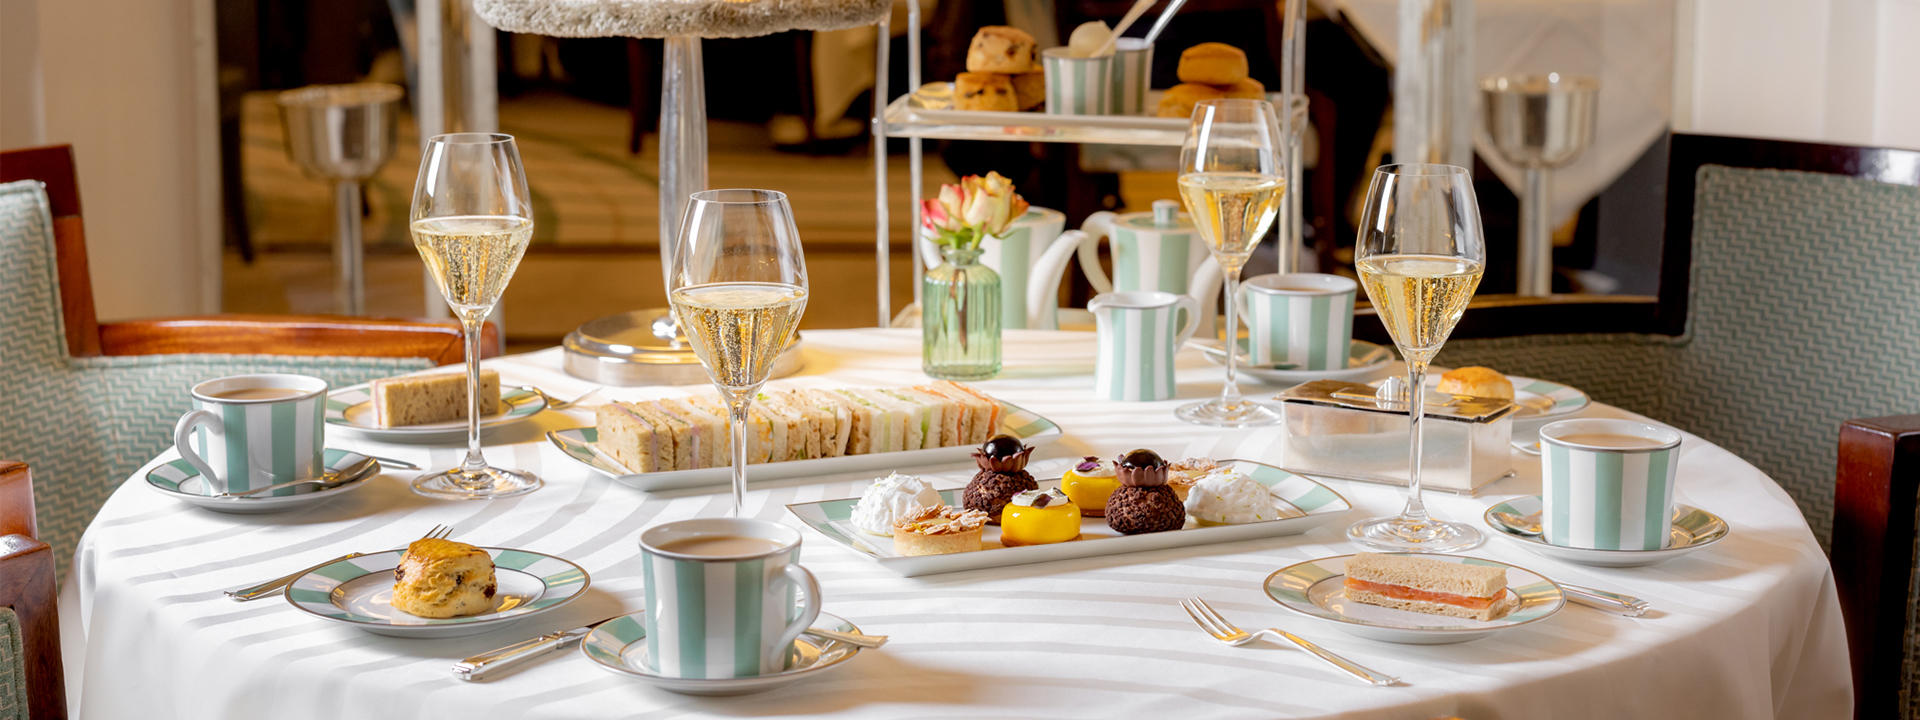 Afternoon Tea at The May Fair Hotel Restaurant - London